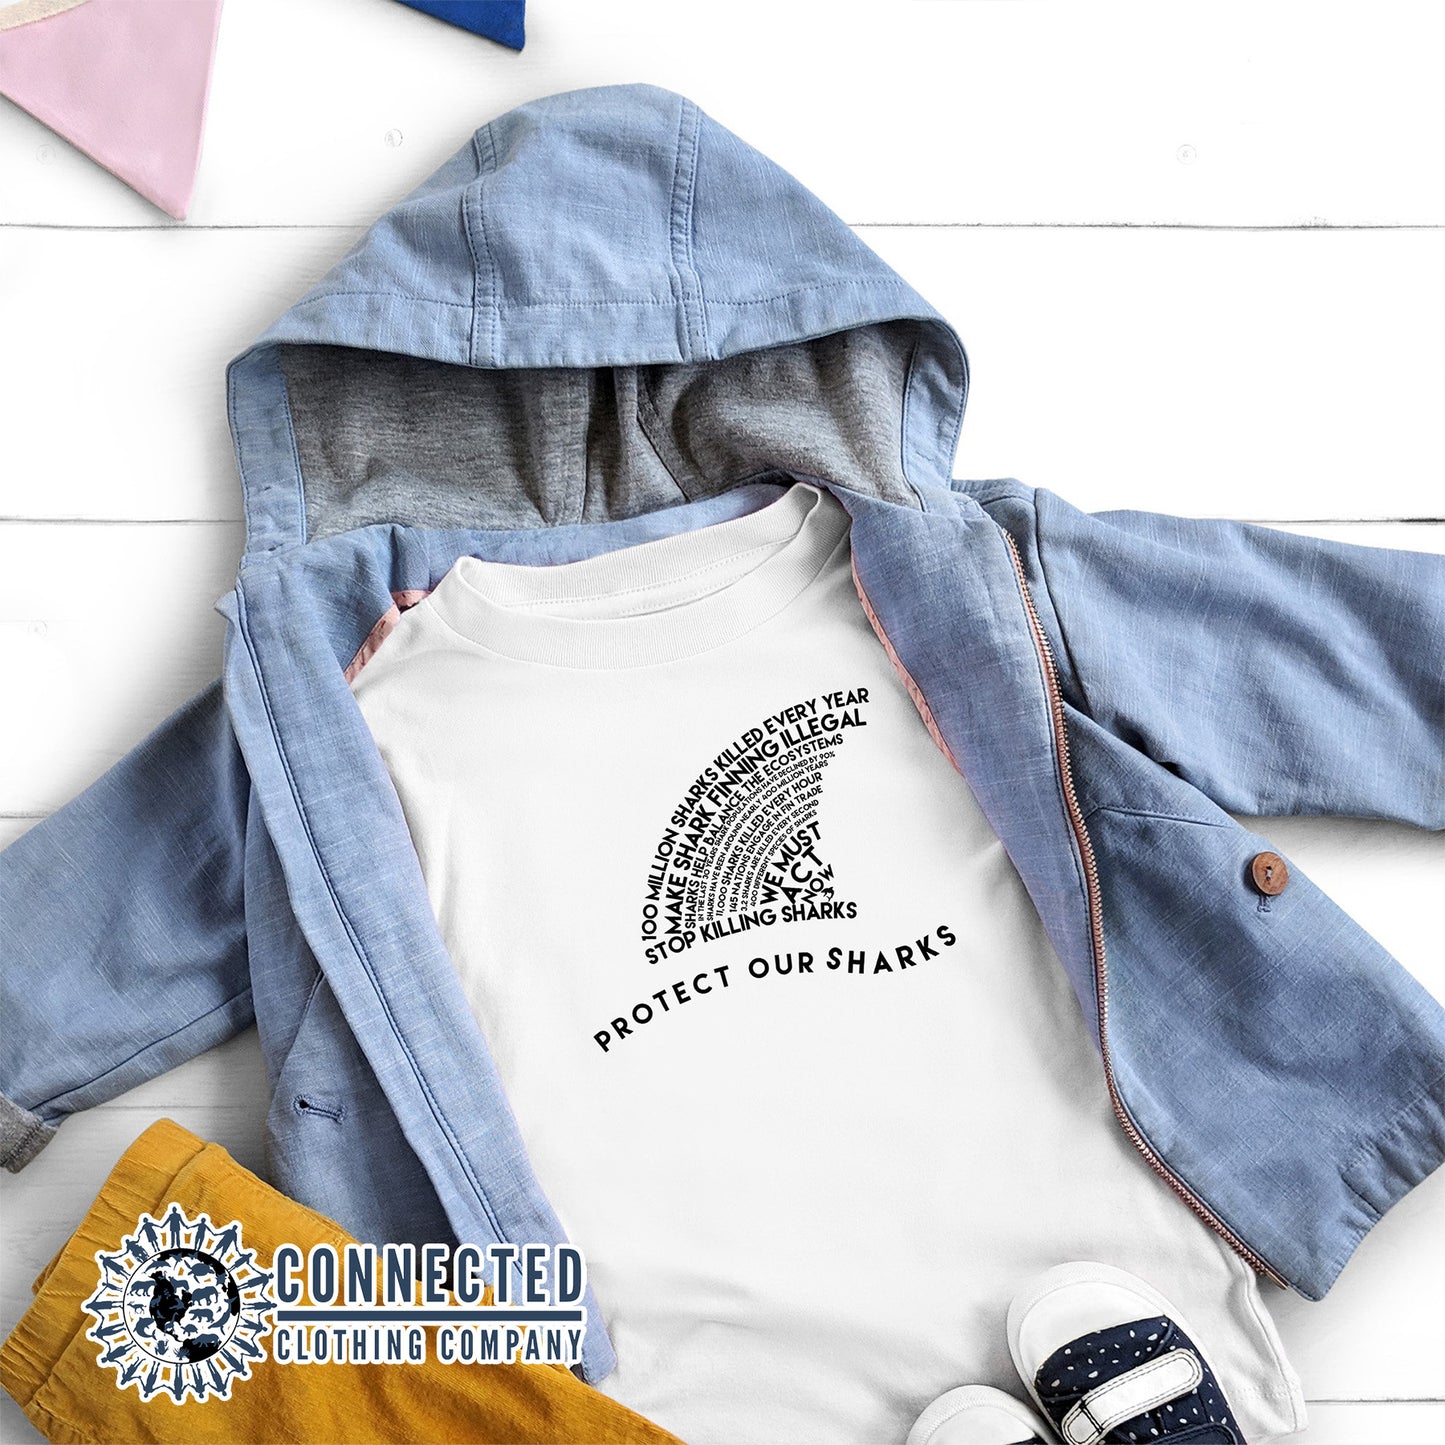 White Protect Our Sharks Toddler Short-Sleeve Tee - Connected Clothing Company - 10% of profits donated to Oceana shark conservation